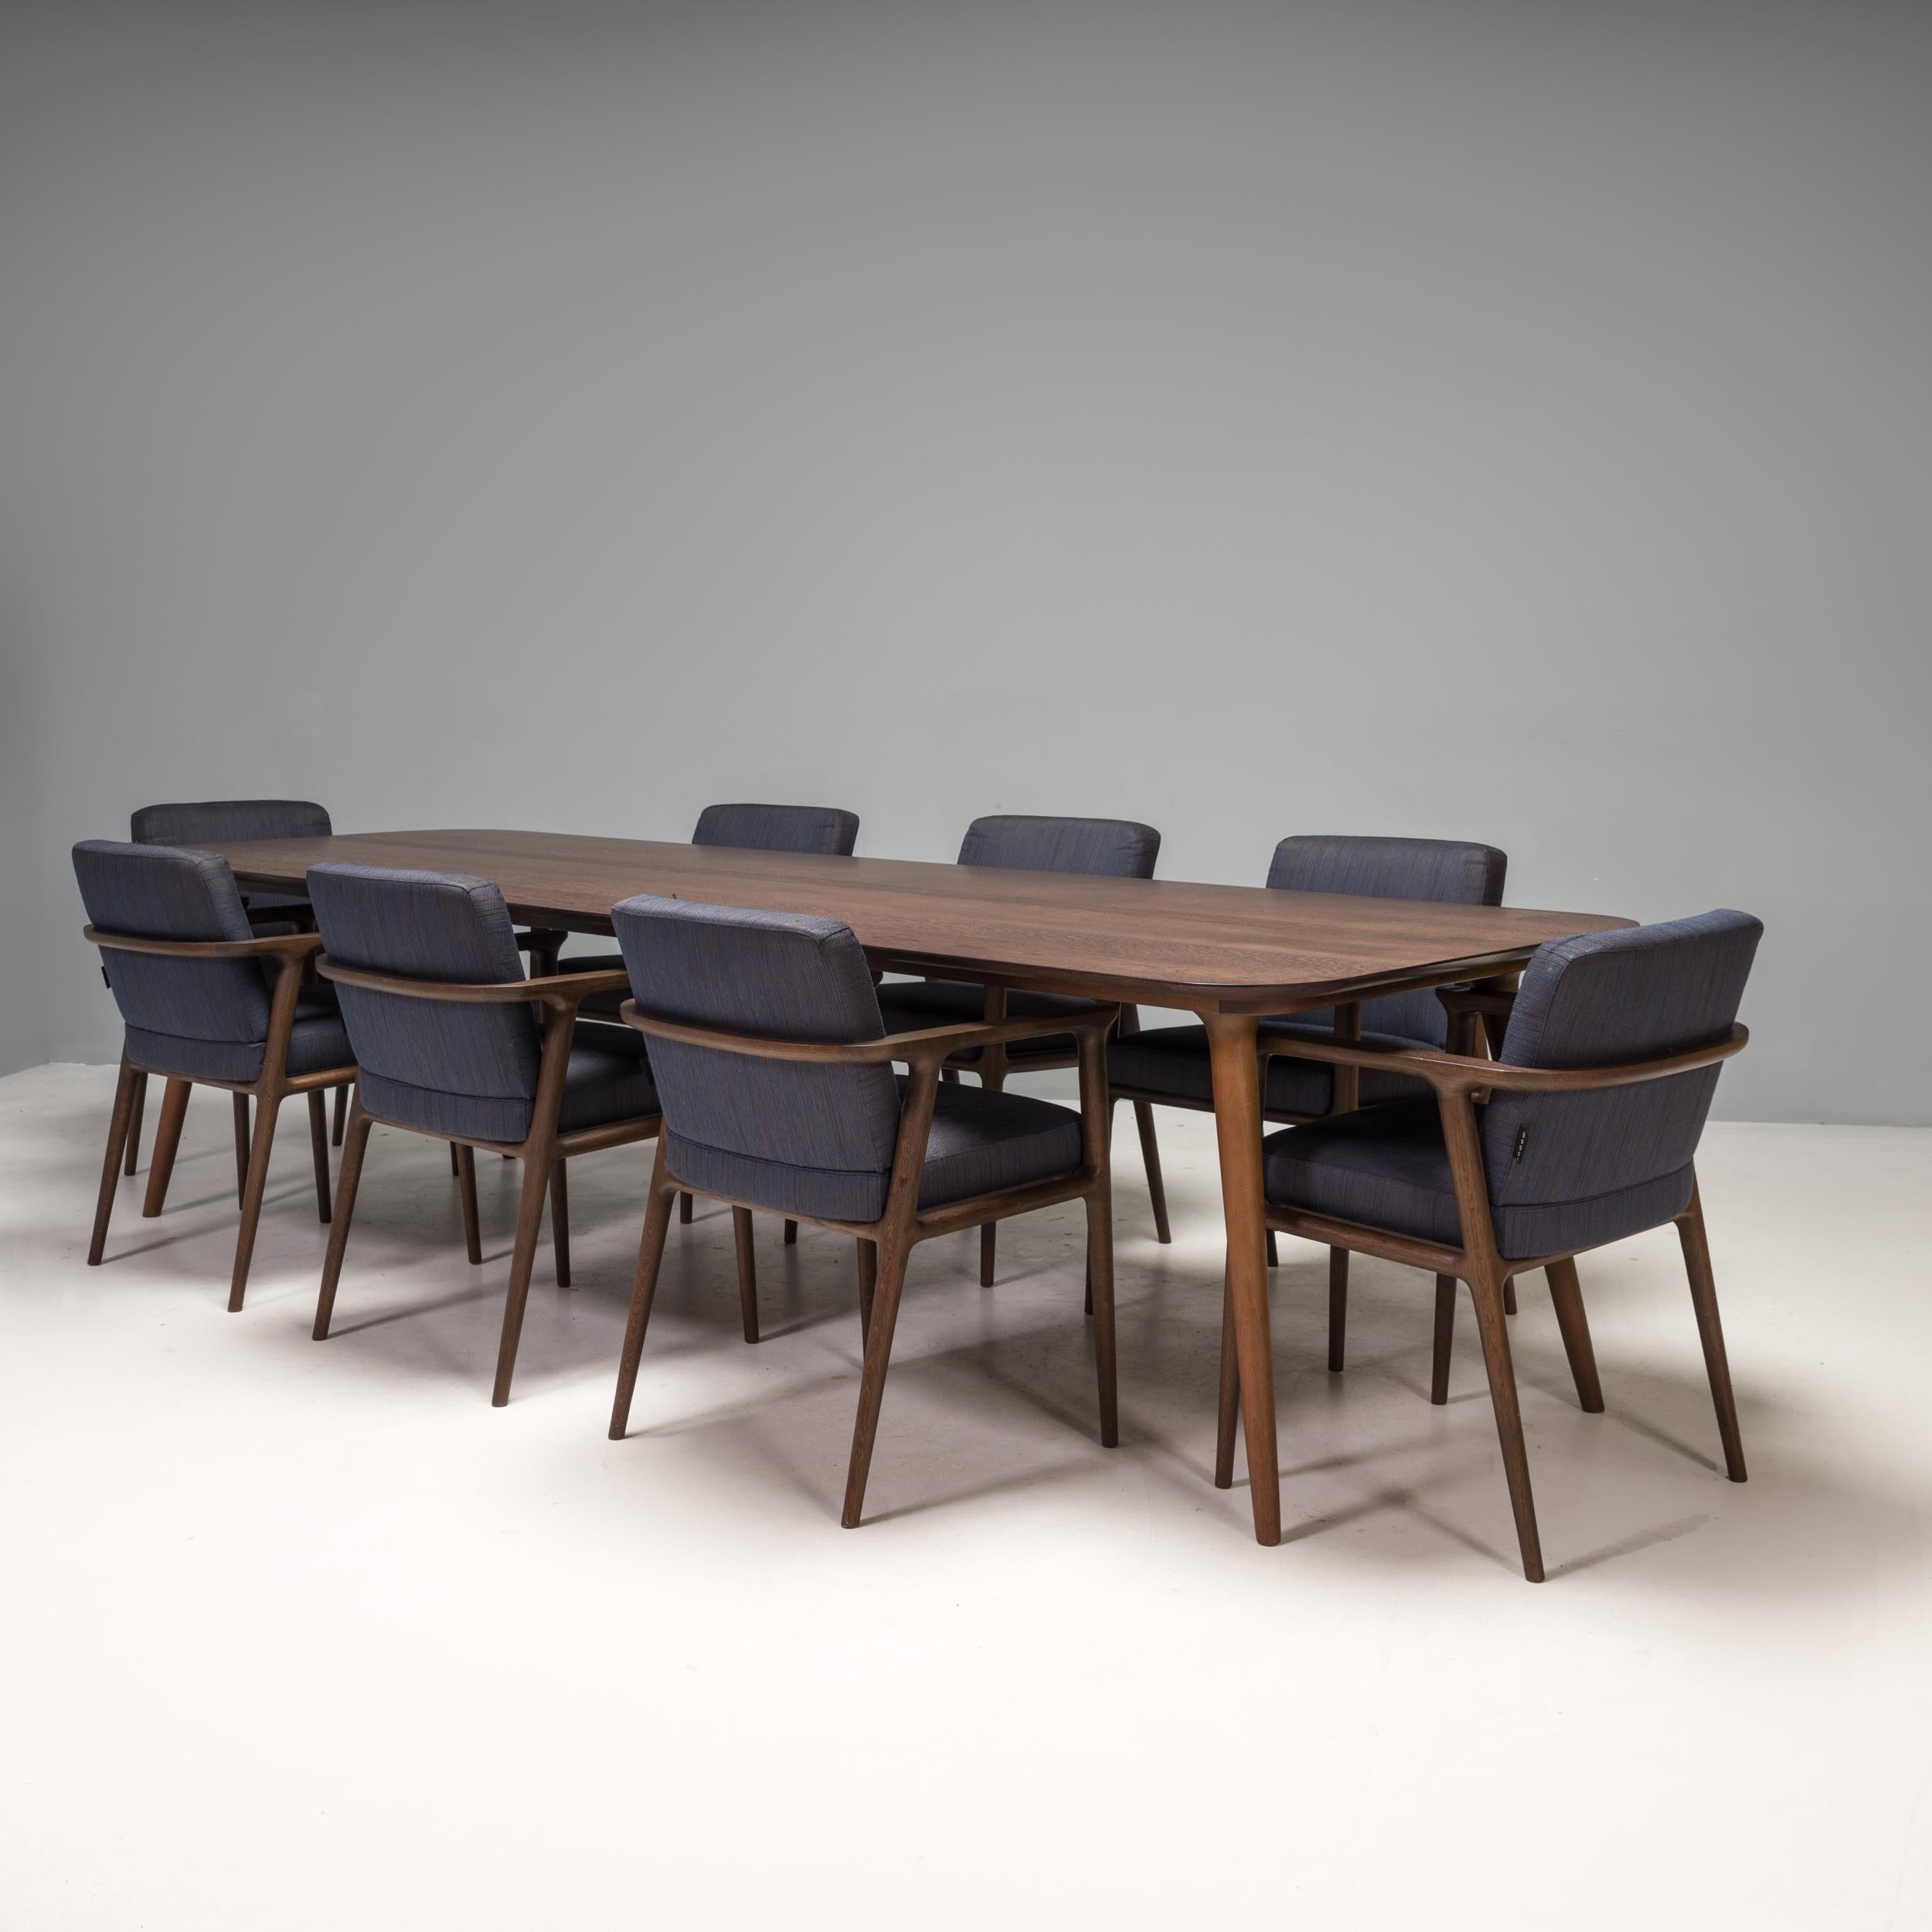 Originally designed by Marcel Wanders for Moooi in 2013, the Zio range exudes classic elegance.

Comprising a dining table and eight dining chairs, this set is constructed from wenge stained oak.

The dining chairs feature tapered legs and a